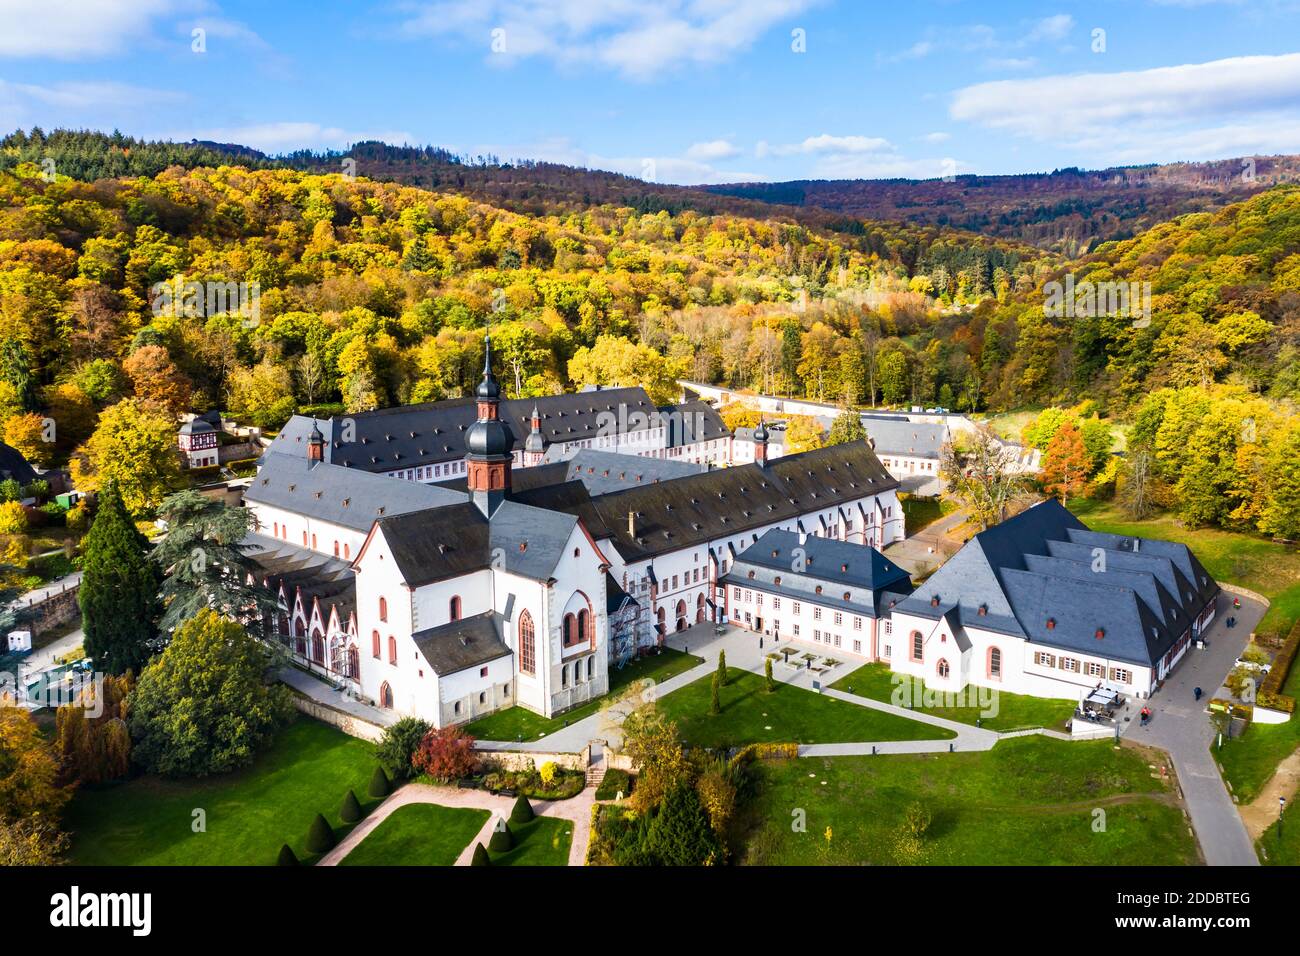 Eberbach Abbey surrounded with forests in Autumn Stock Photo